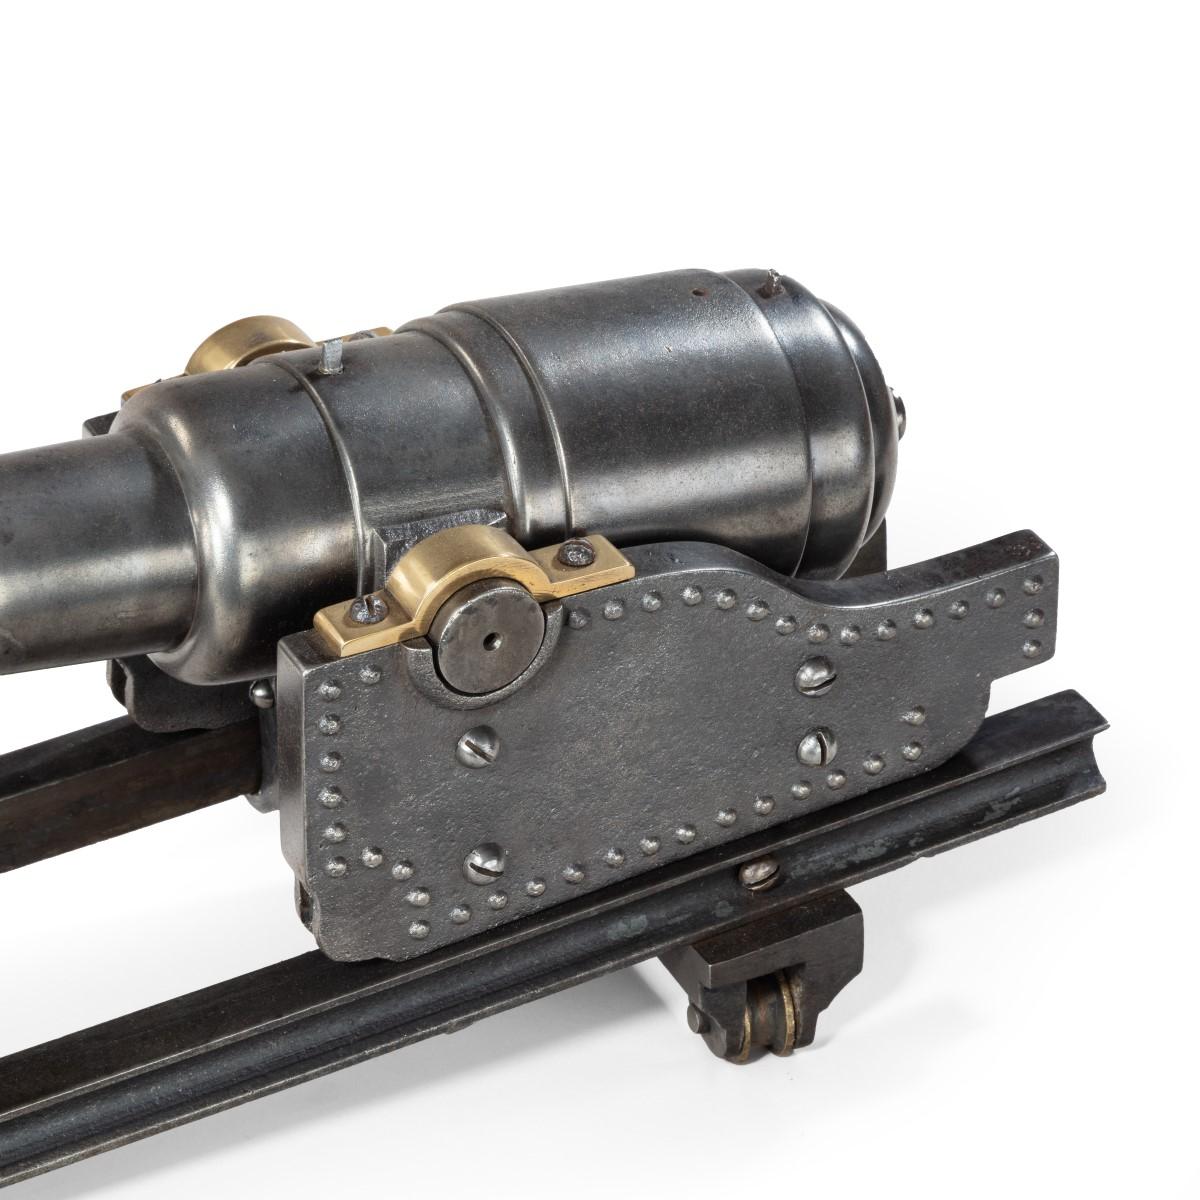 A polished steel nine stage coastal defense cannon, the barrel and riveted carriage set on sliding rails to accommodate the recoil. English, c 1900.